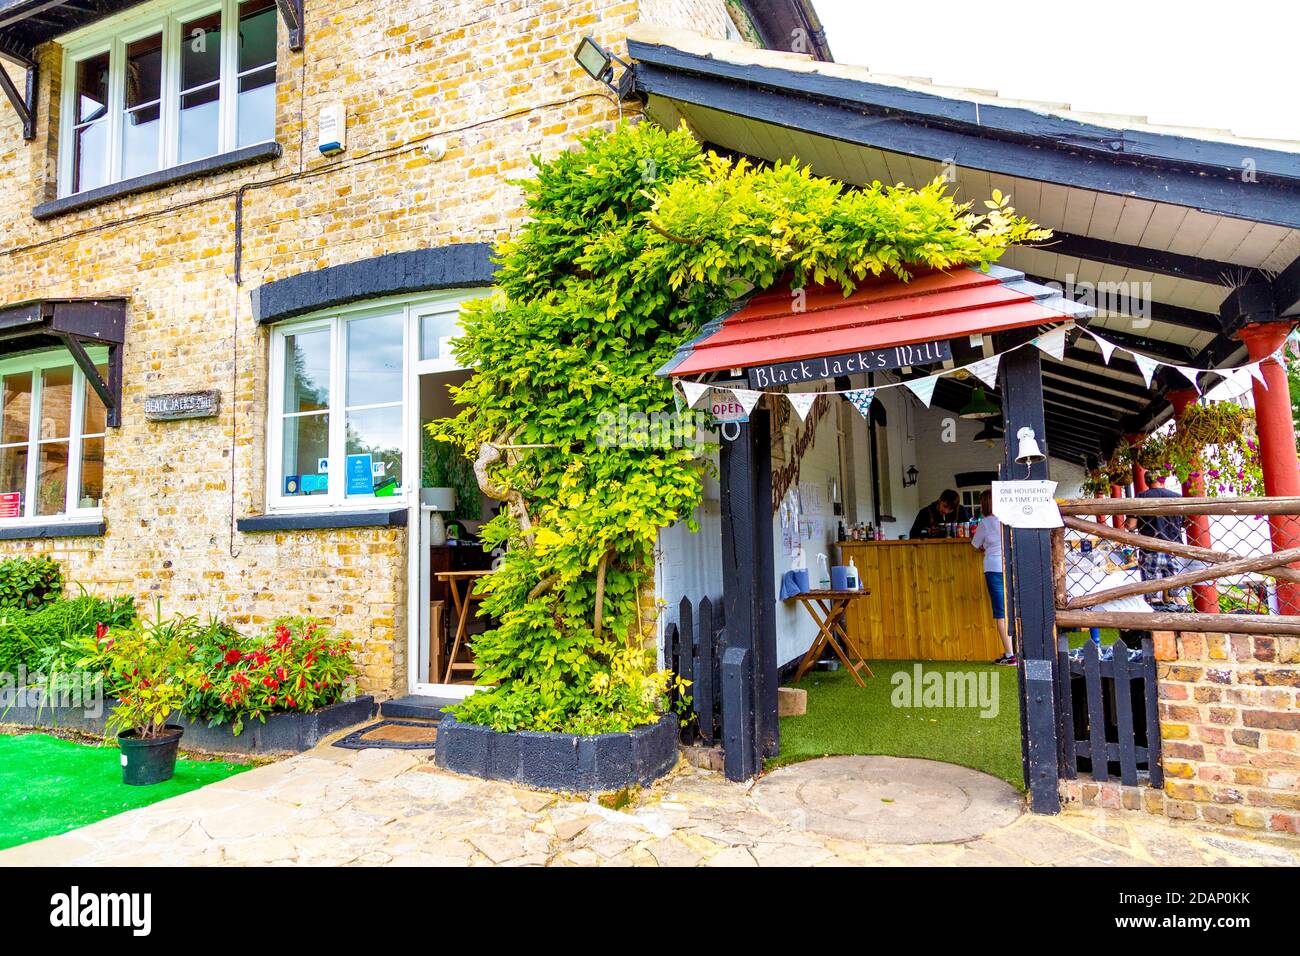 Black Jack's Mill cafe along the Grand Union Canal in Colne Valley, Uxbridge, UK Stock Photo